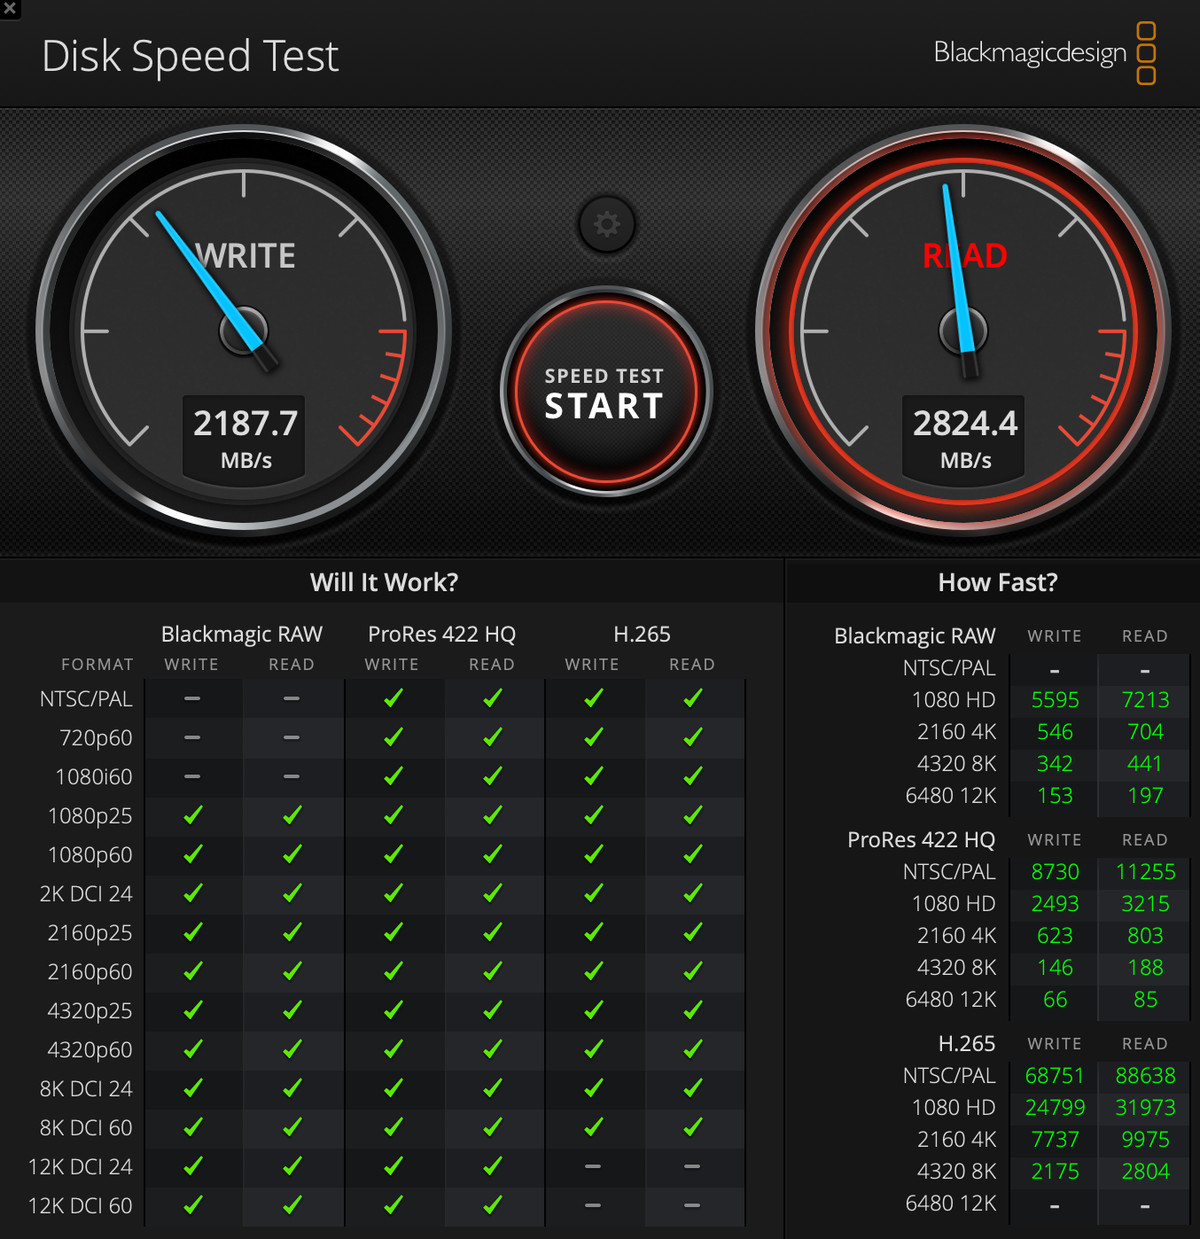 A screenshot from the Blackmagic Disk Speed ​​Test showing scores of 2187.7 for writes and 2824.4 for reads.